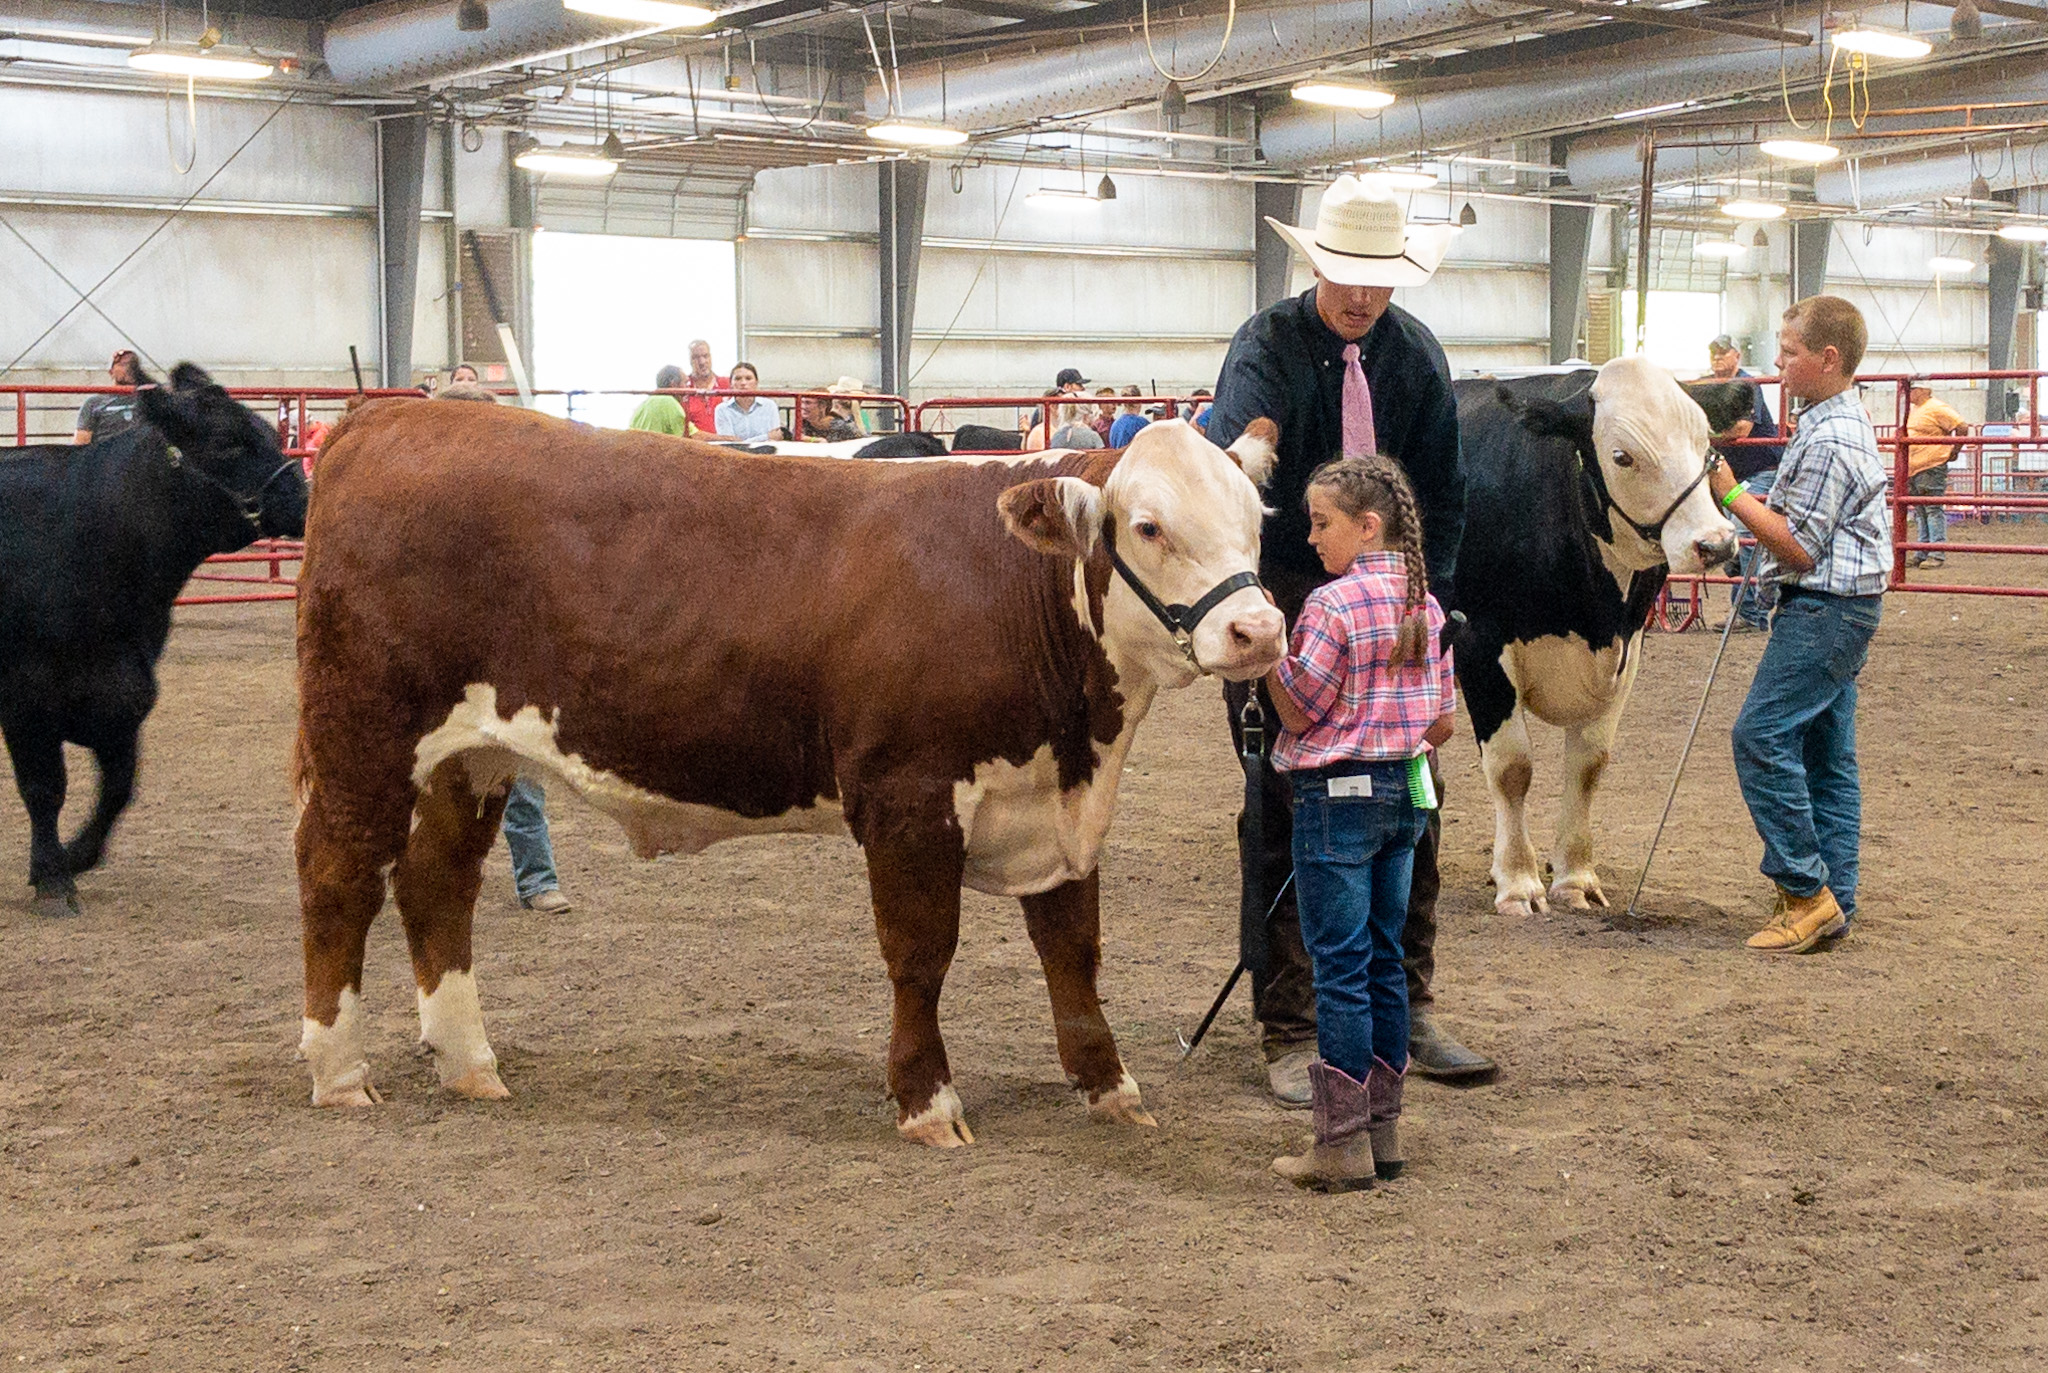 Layla Mayr, 9, from DeForest, Wisconsin shows her cow that she nicknamed “Steamy.” (Photo by Christina Lieffring)